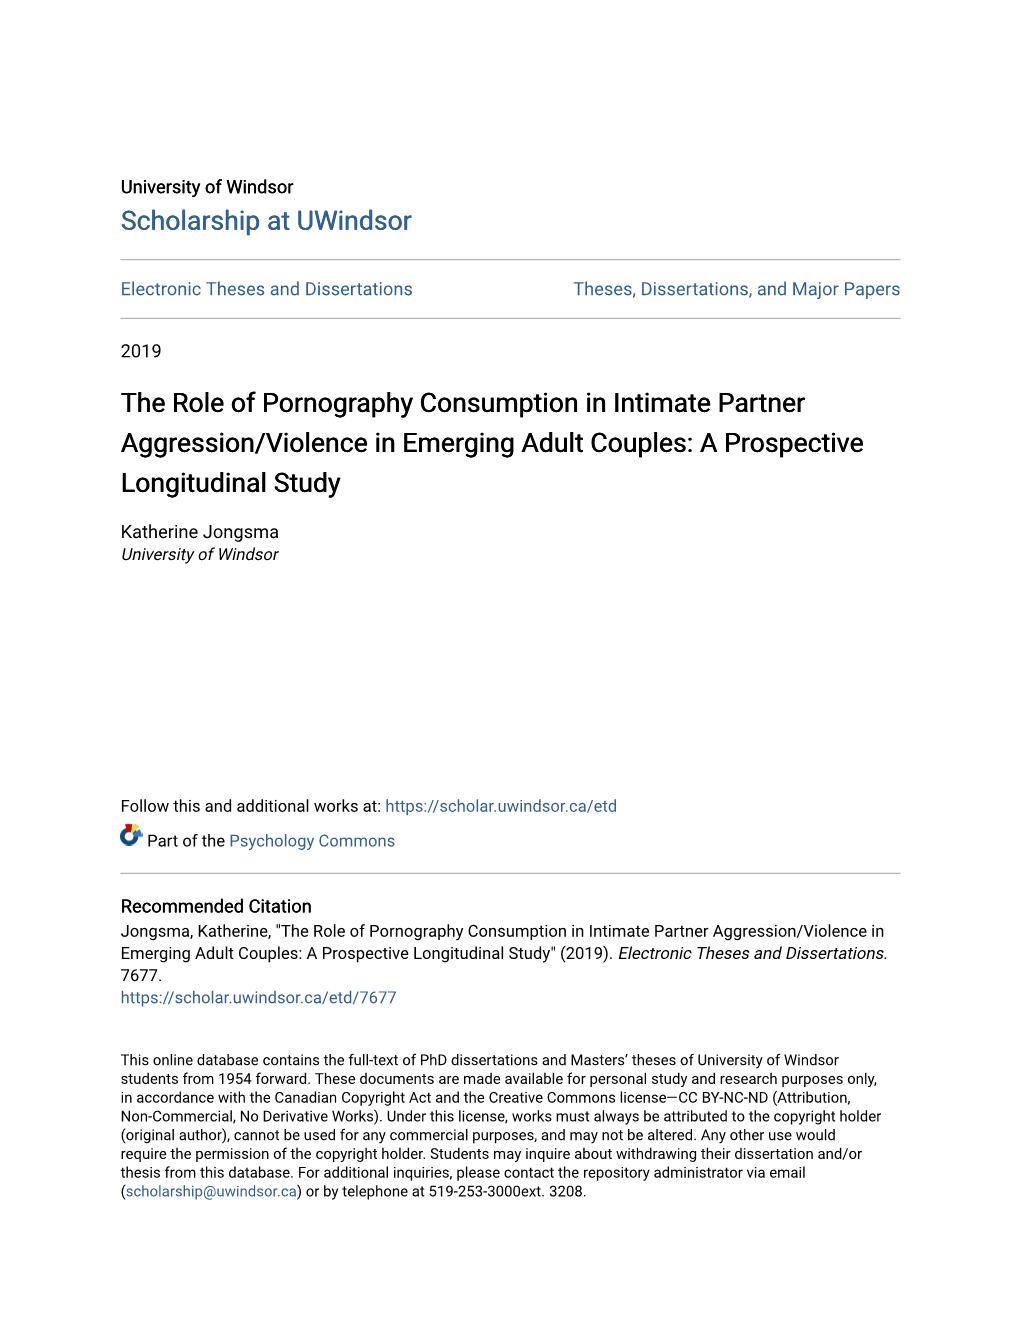 The Role of Pornography Consumption in Intimate Partner Aggression/Violence in Emerging Adult Couples: a Prospective Longitudinal Study